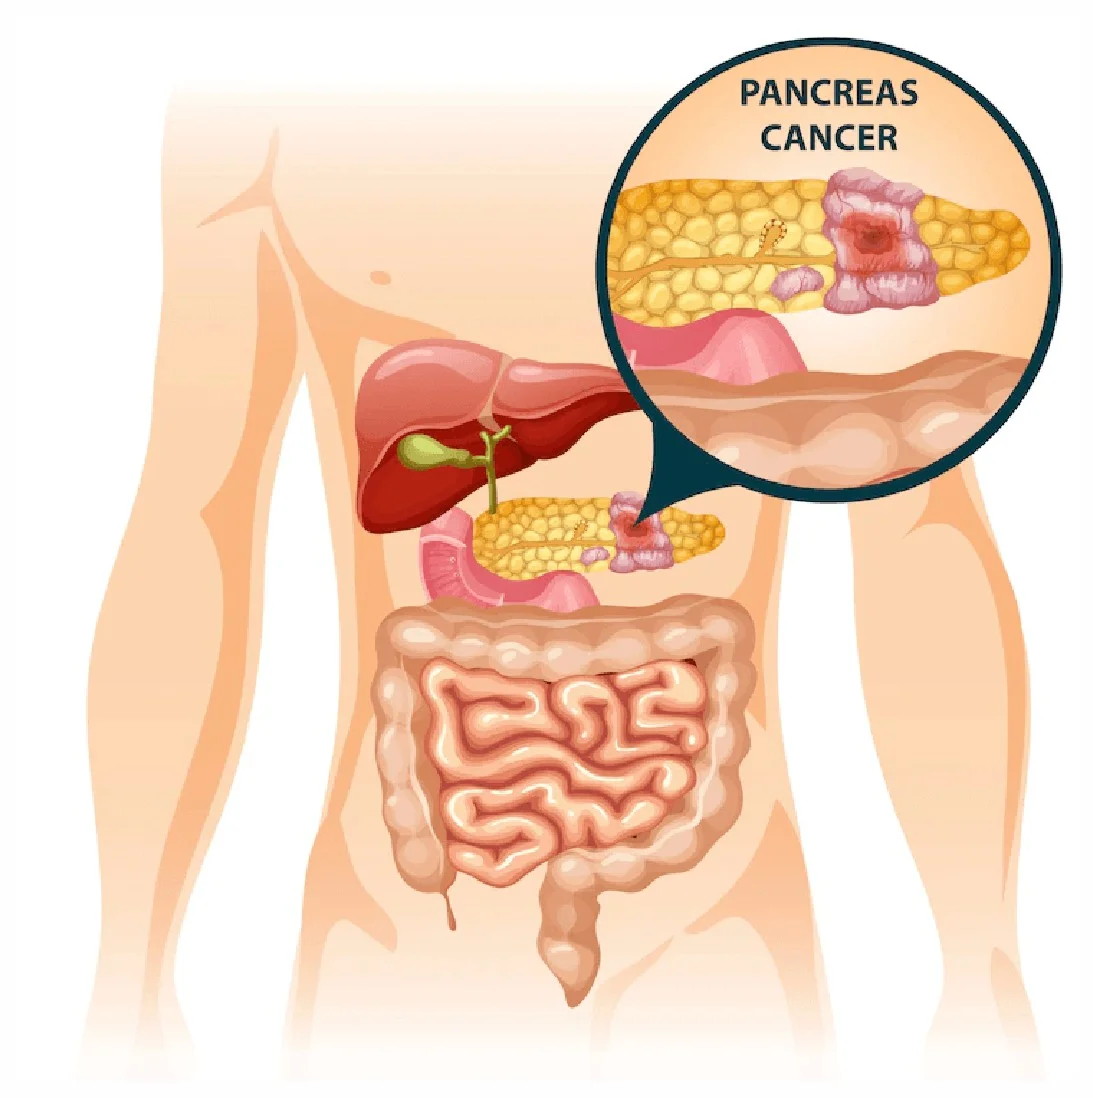 Best Treatment for Pancreatic Cancer at Gangasheel Hospital - Bareilly